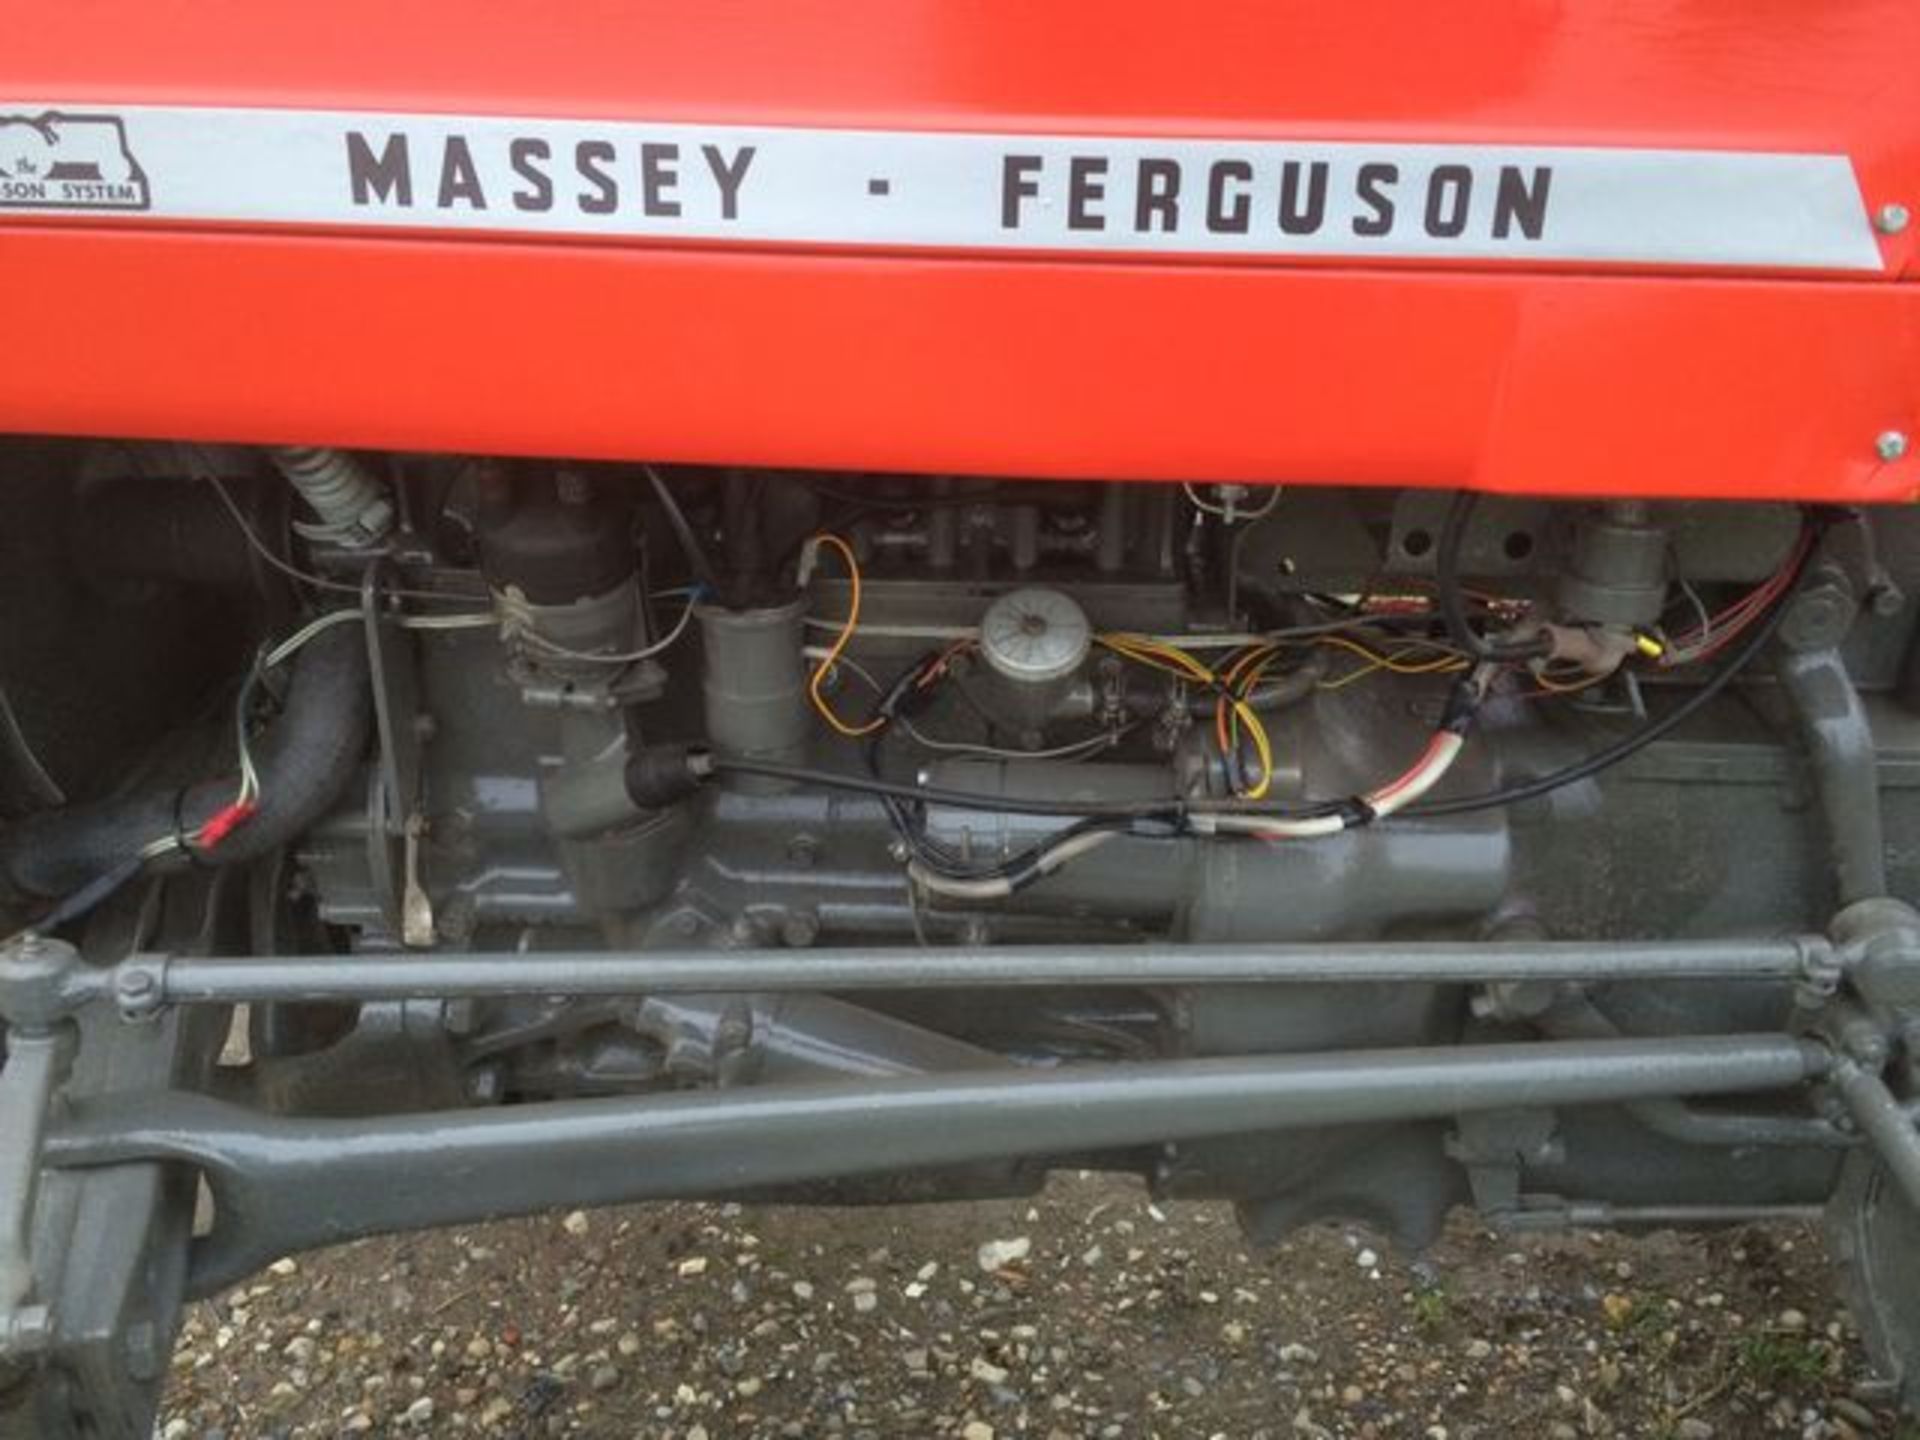 MASSEY FERGUSON Age unknown production ran between 1965 and 1975 this example shows 4107 hours - Image 5 of 10